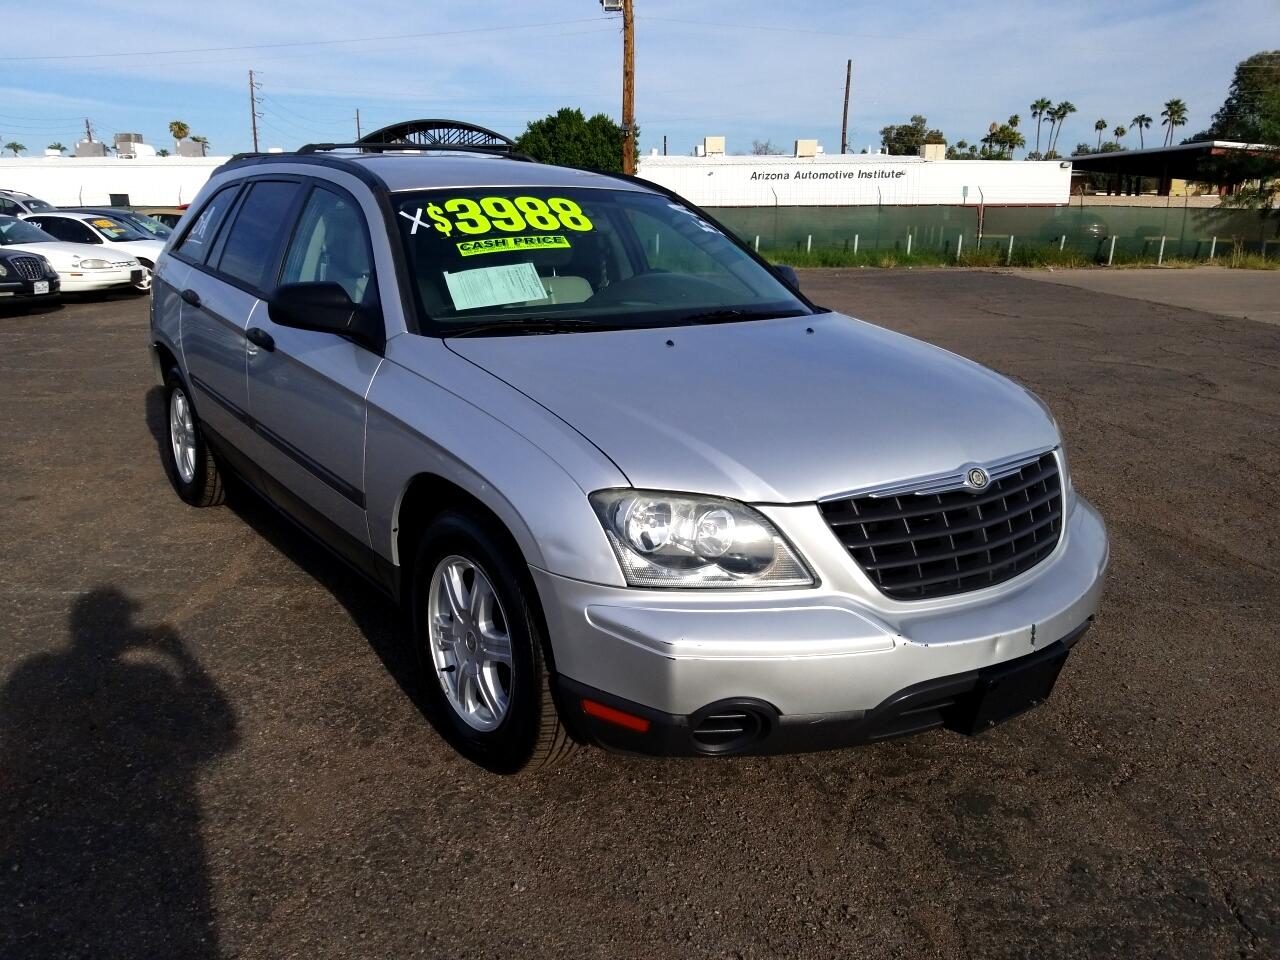 Used 2005 Chrysler Pacifica FWD for Sale in Phoenix AZ